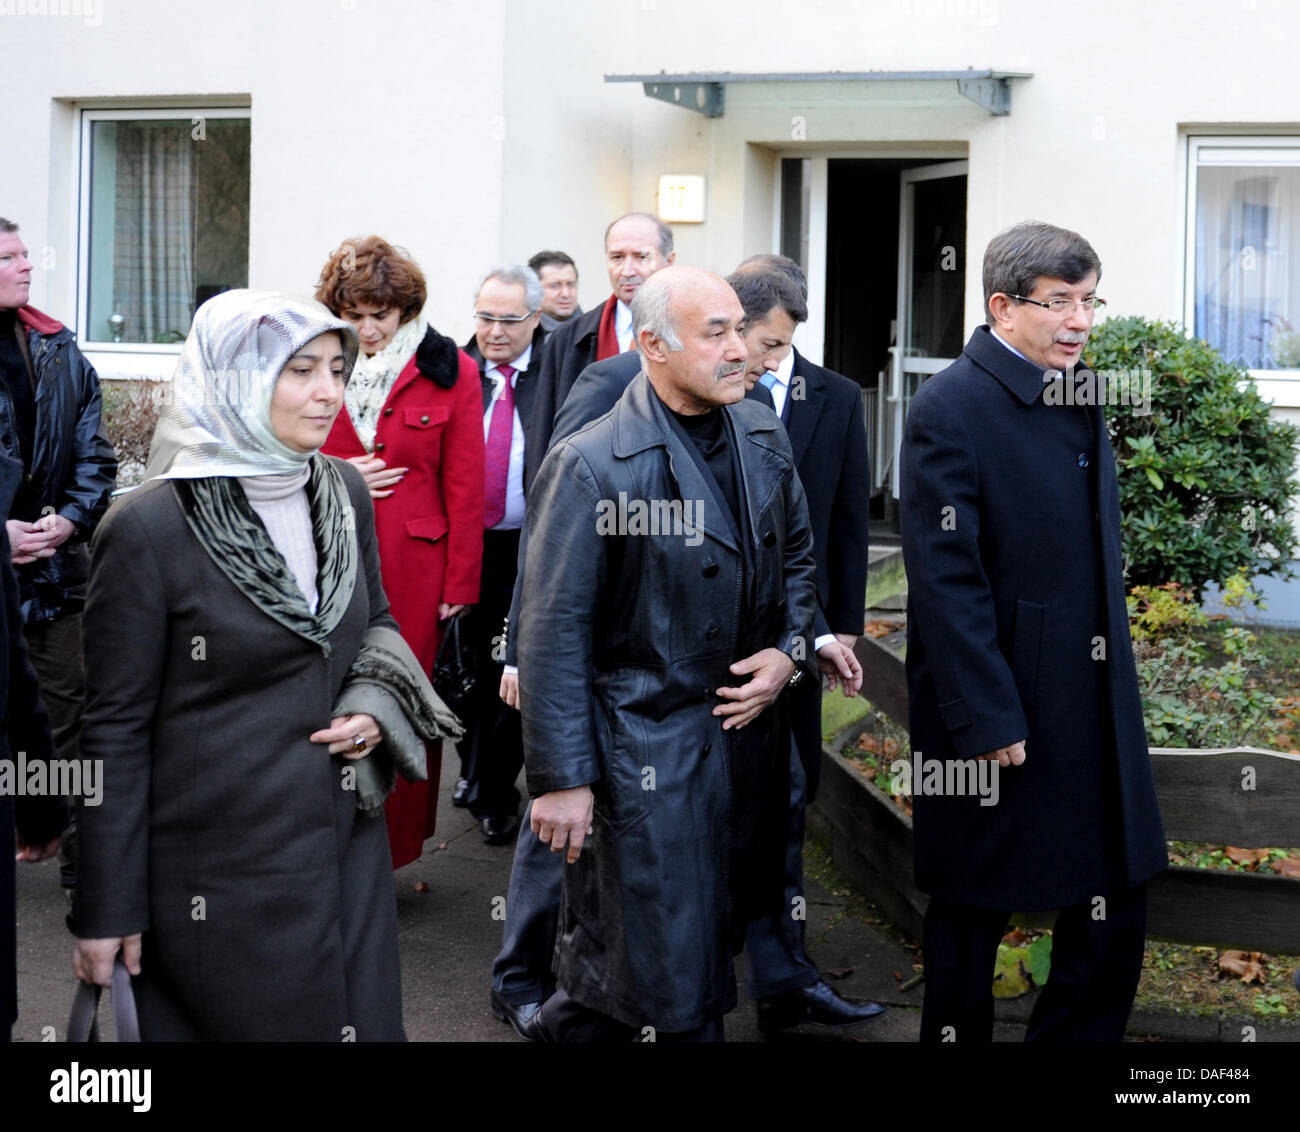 The Turkish Foreign Minister Ahmet Davutoglu (R) and Ali Taskopru (C), father of a vegetable seller murdered in 2001, walk past the victim's house in Hamburg, Germany, 01 December 2011. During his trip through Germany, Davutoglu visits several family members of victims of the Zwickau-based neo-Nazi terror cell. In his four-day-trip, Davutoglu will also visit Wiesbaden, Frankfurt, F Stock Photo